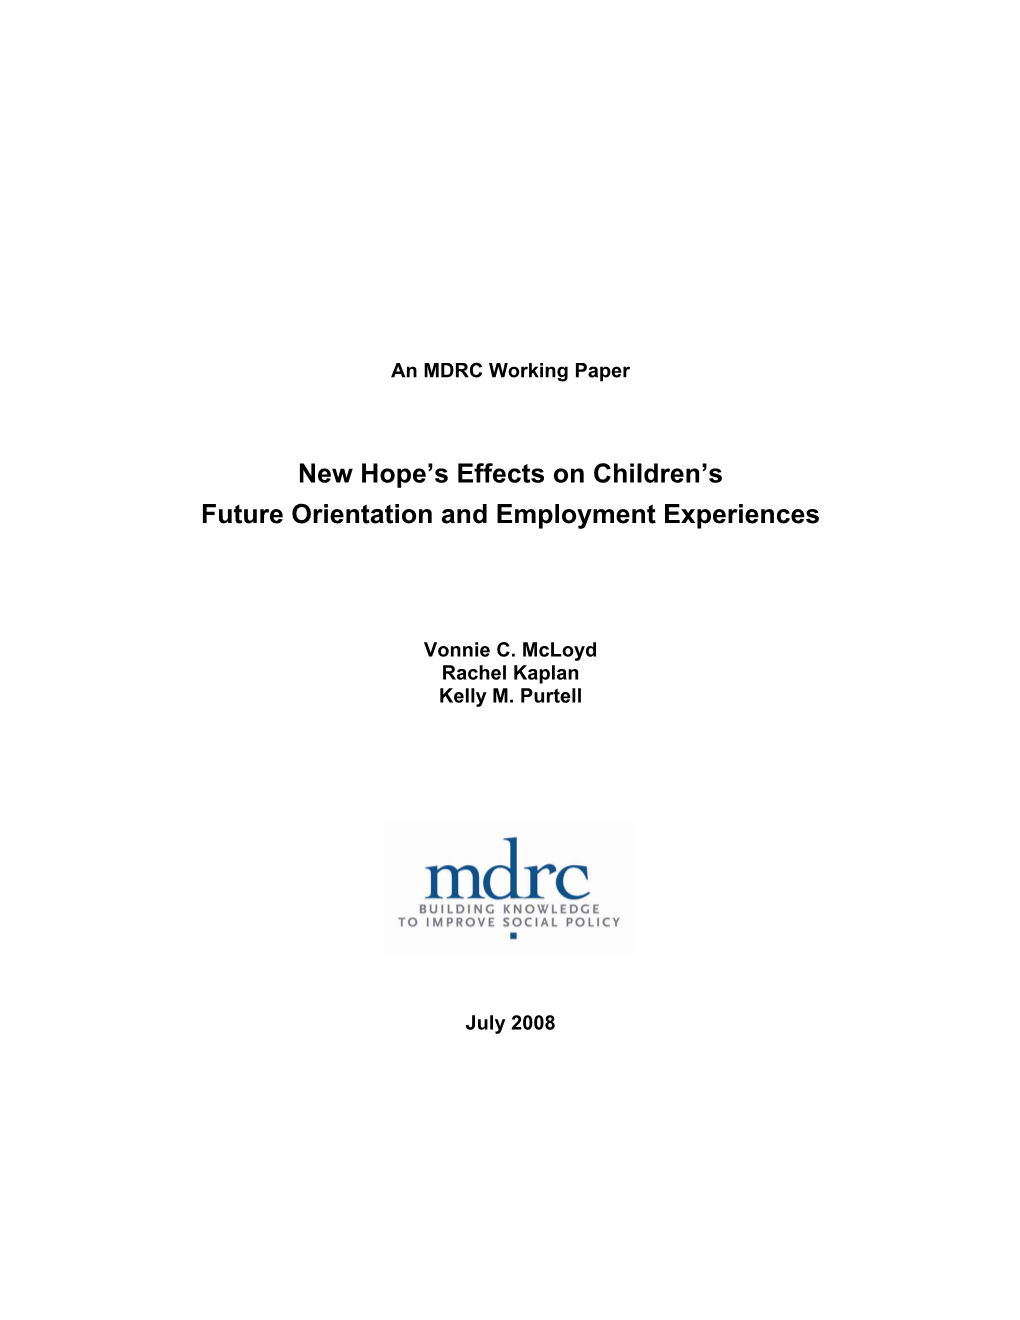 New Hope's Effects on Children's Future Orientation and Employment